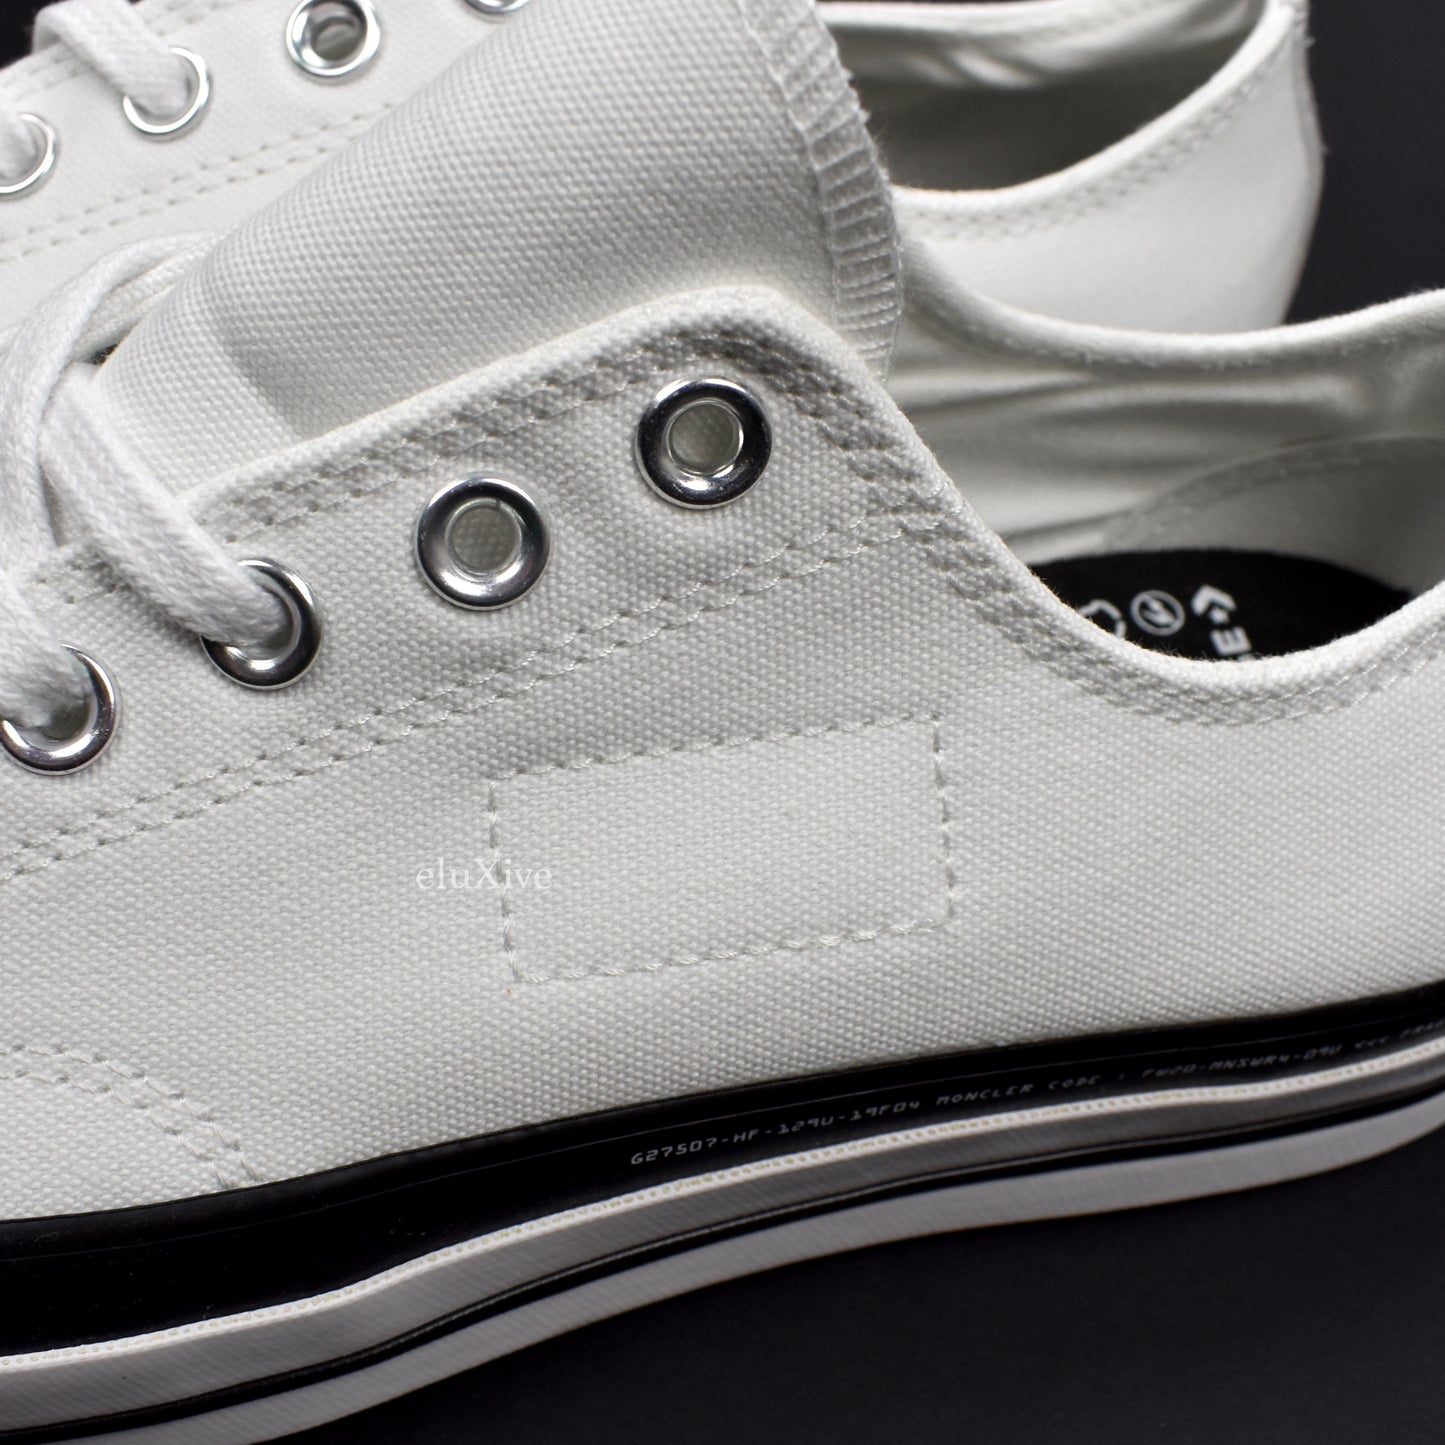 Moncler x Converse x Fragment - Low Top Fraylor Sneakers